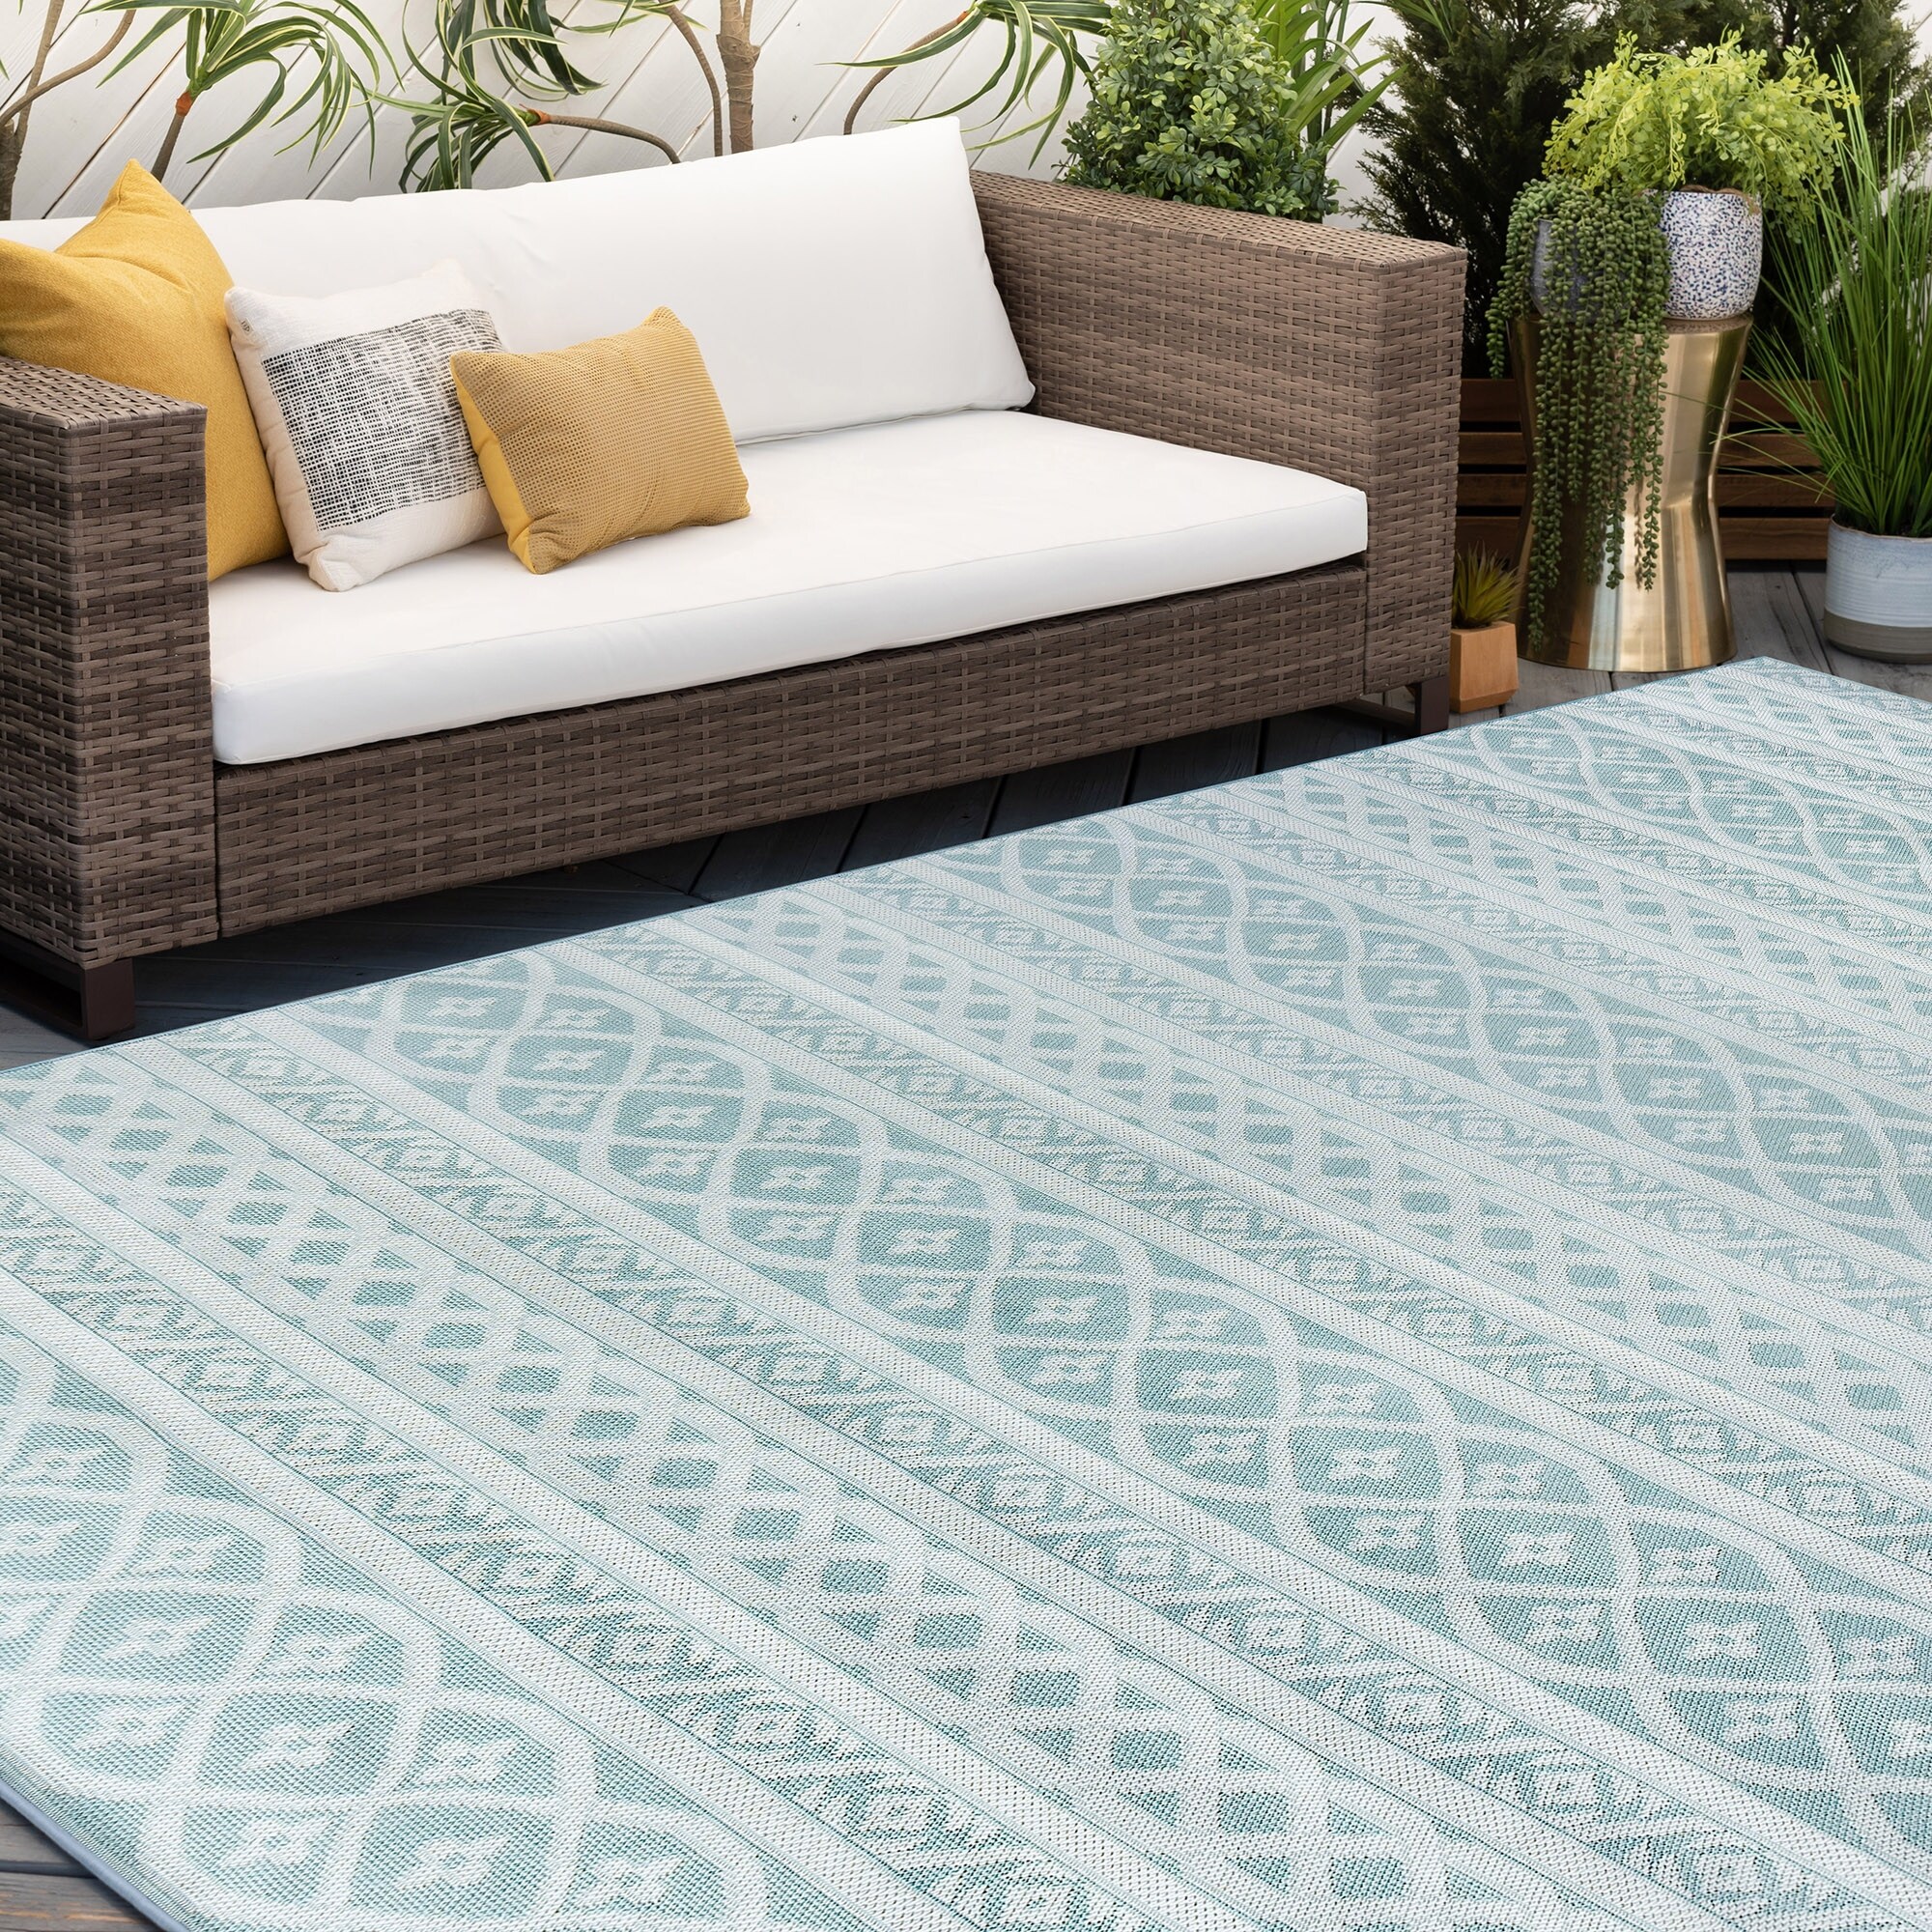 https://ak1.ostkcdn.com/images/products/is/images/direct/d18ad3162d7c8b4361bf451d2fe036e19cde84ea/Alise-Rugs-Vision-Contemporary-Stripe-Area-Rug.jpg